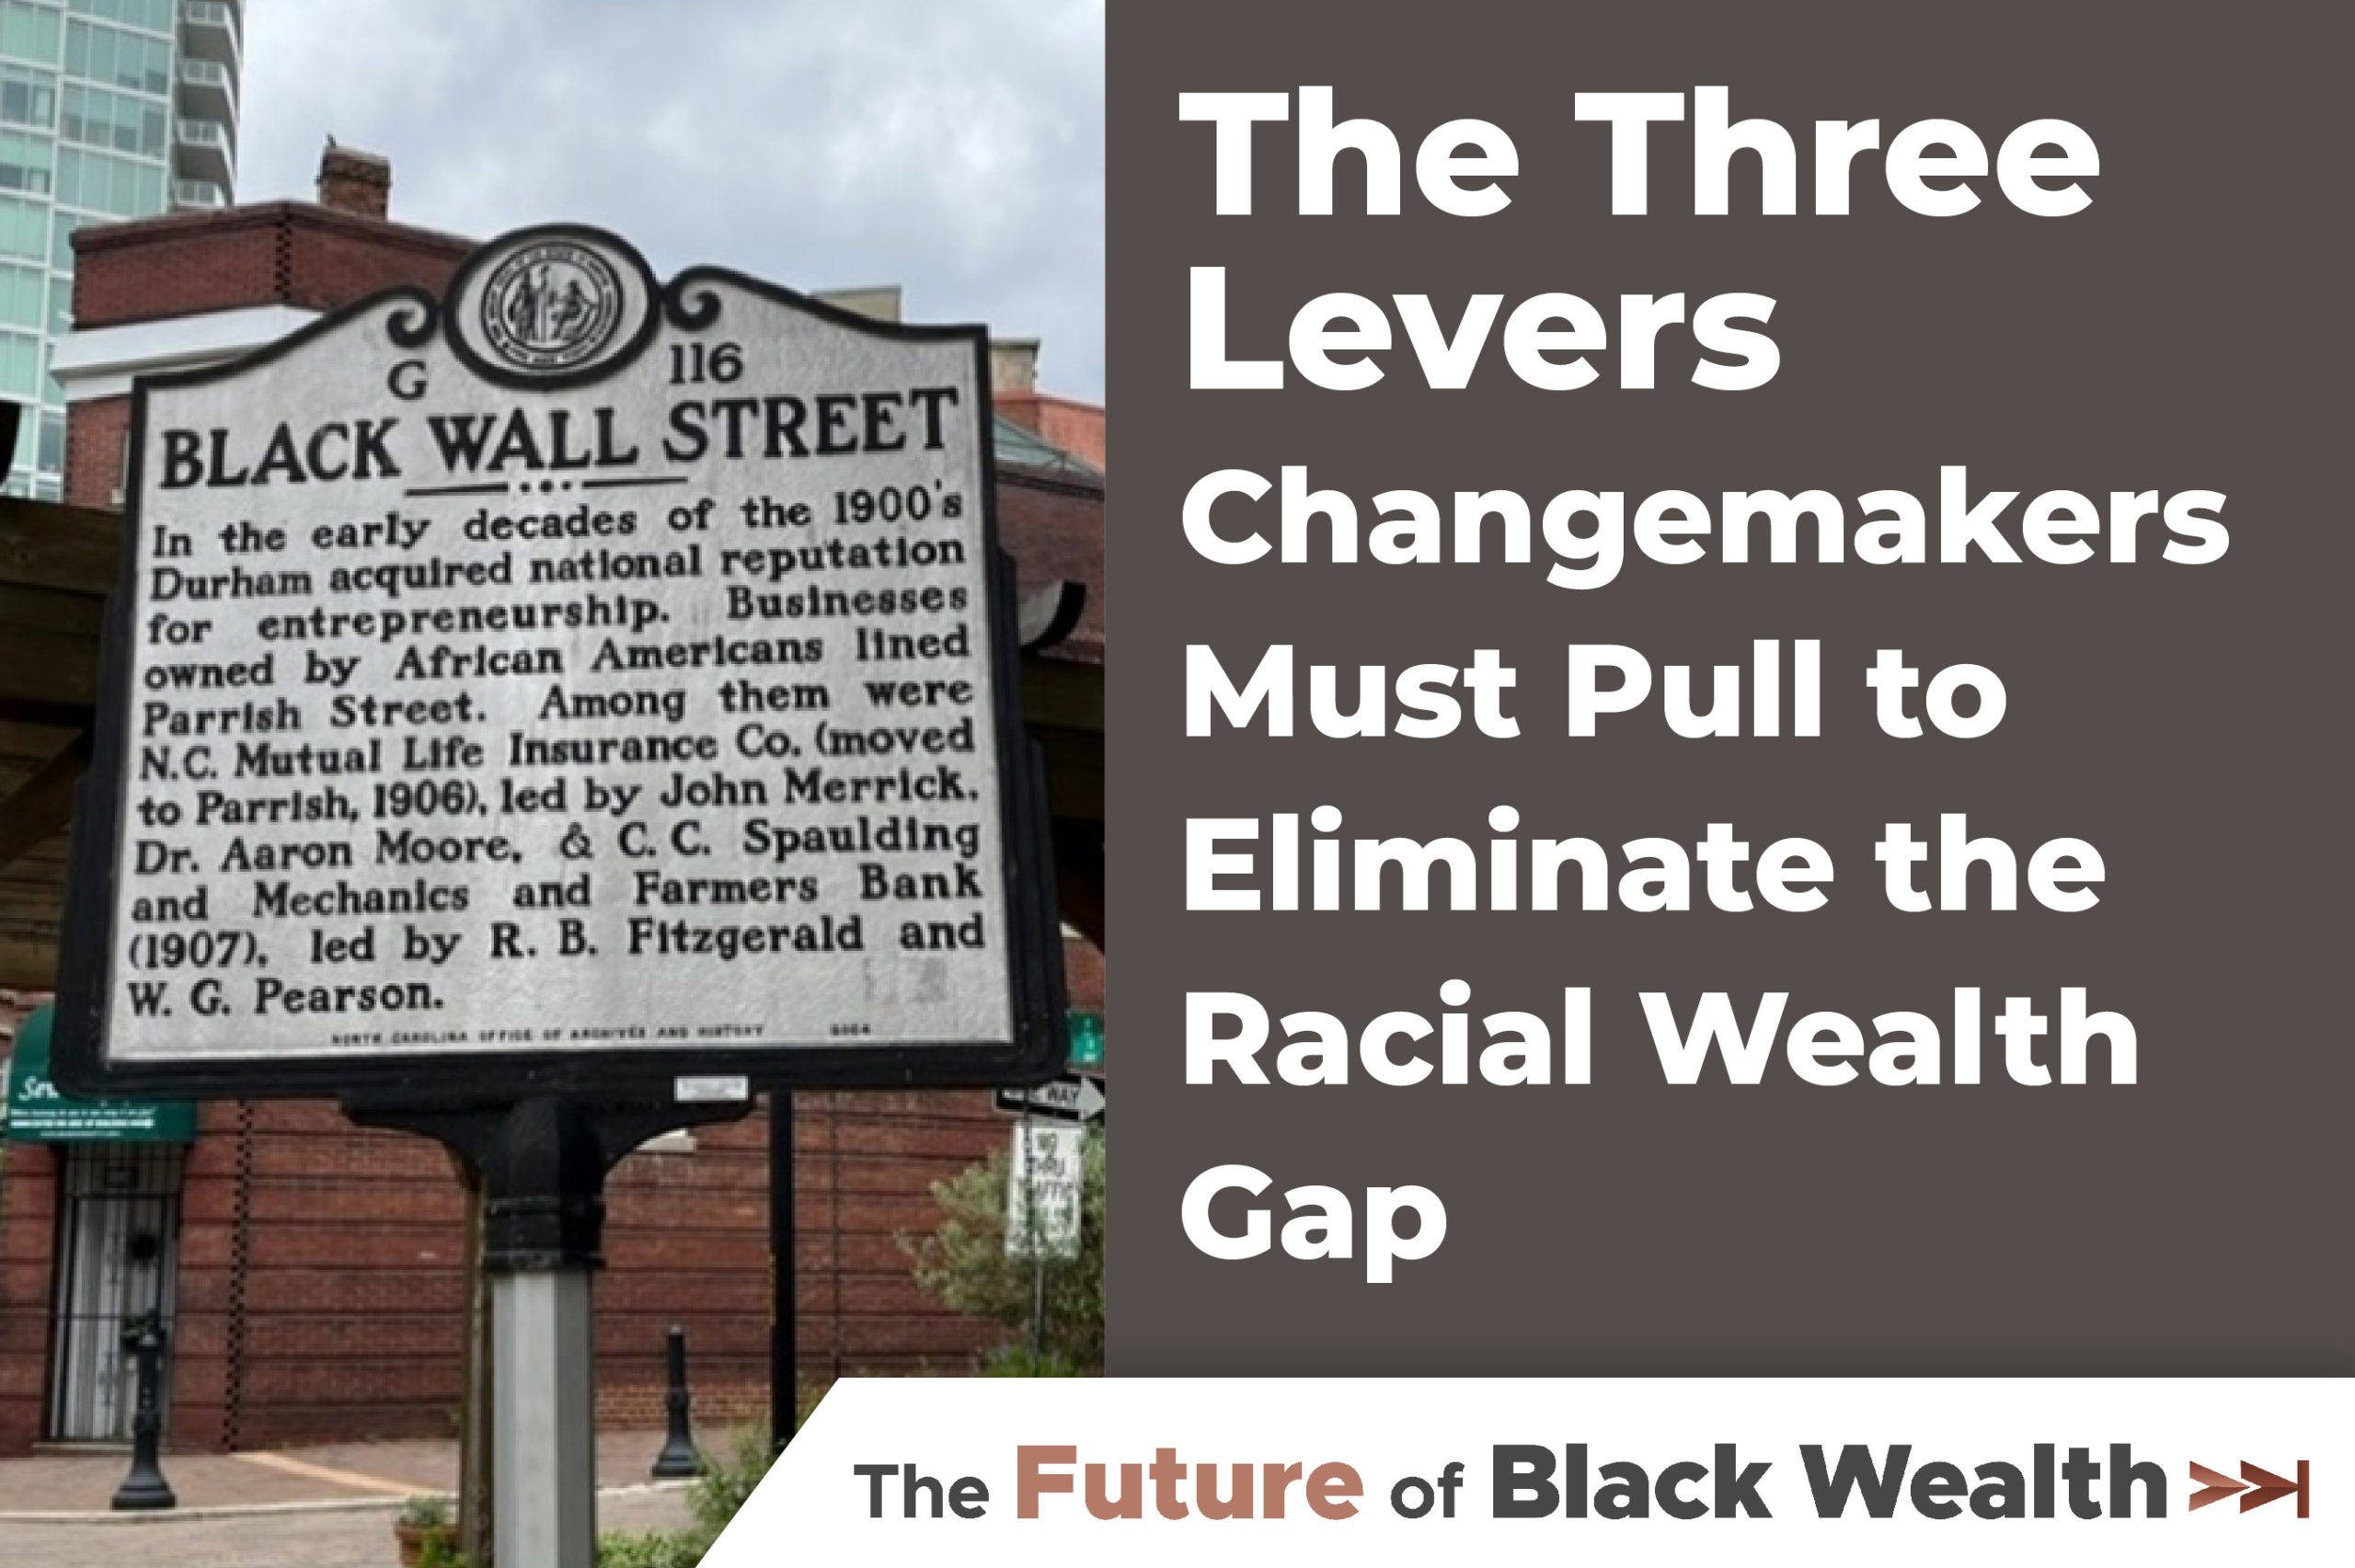 The Three Levers Changemakers Must Pull to Eliminate the Racial Wealth Gap